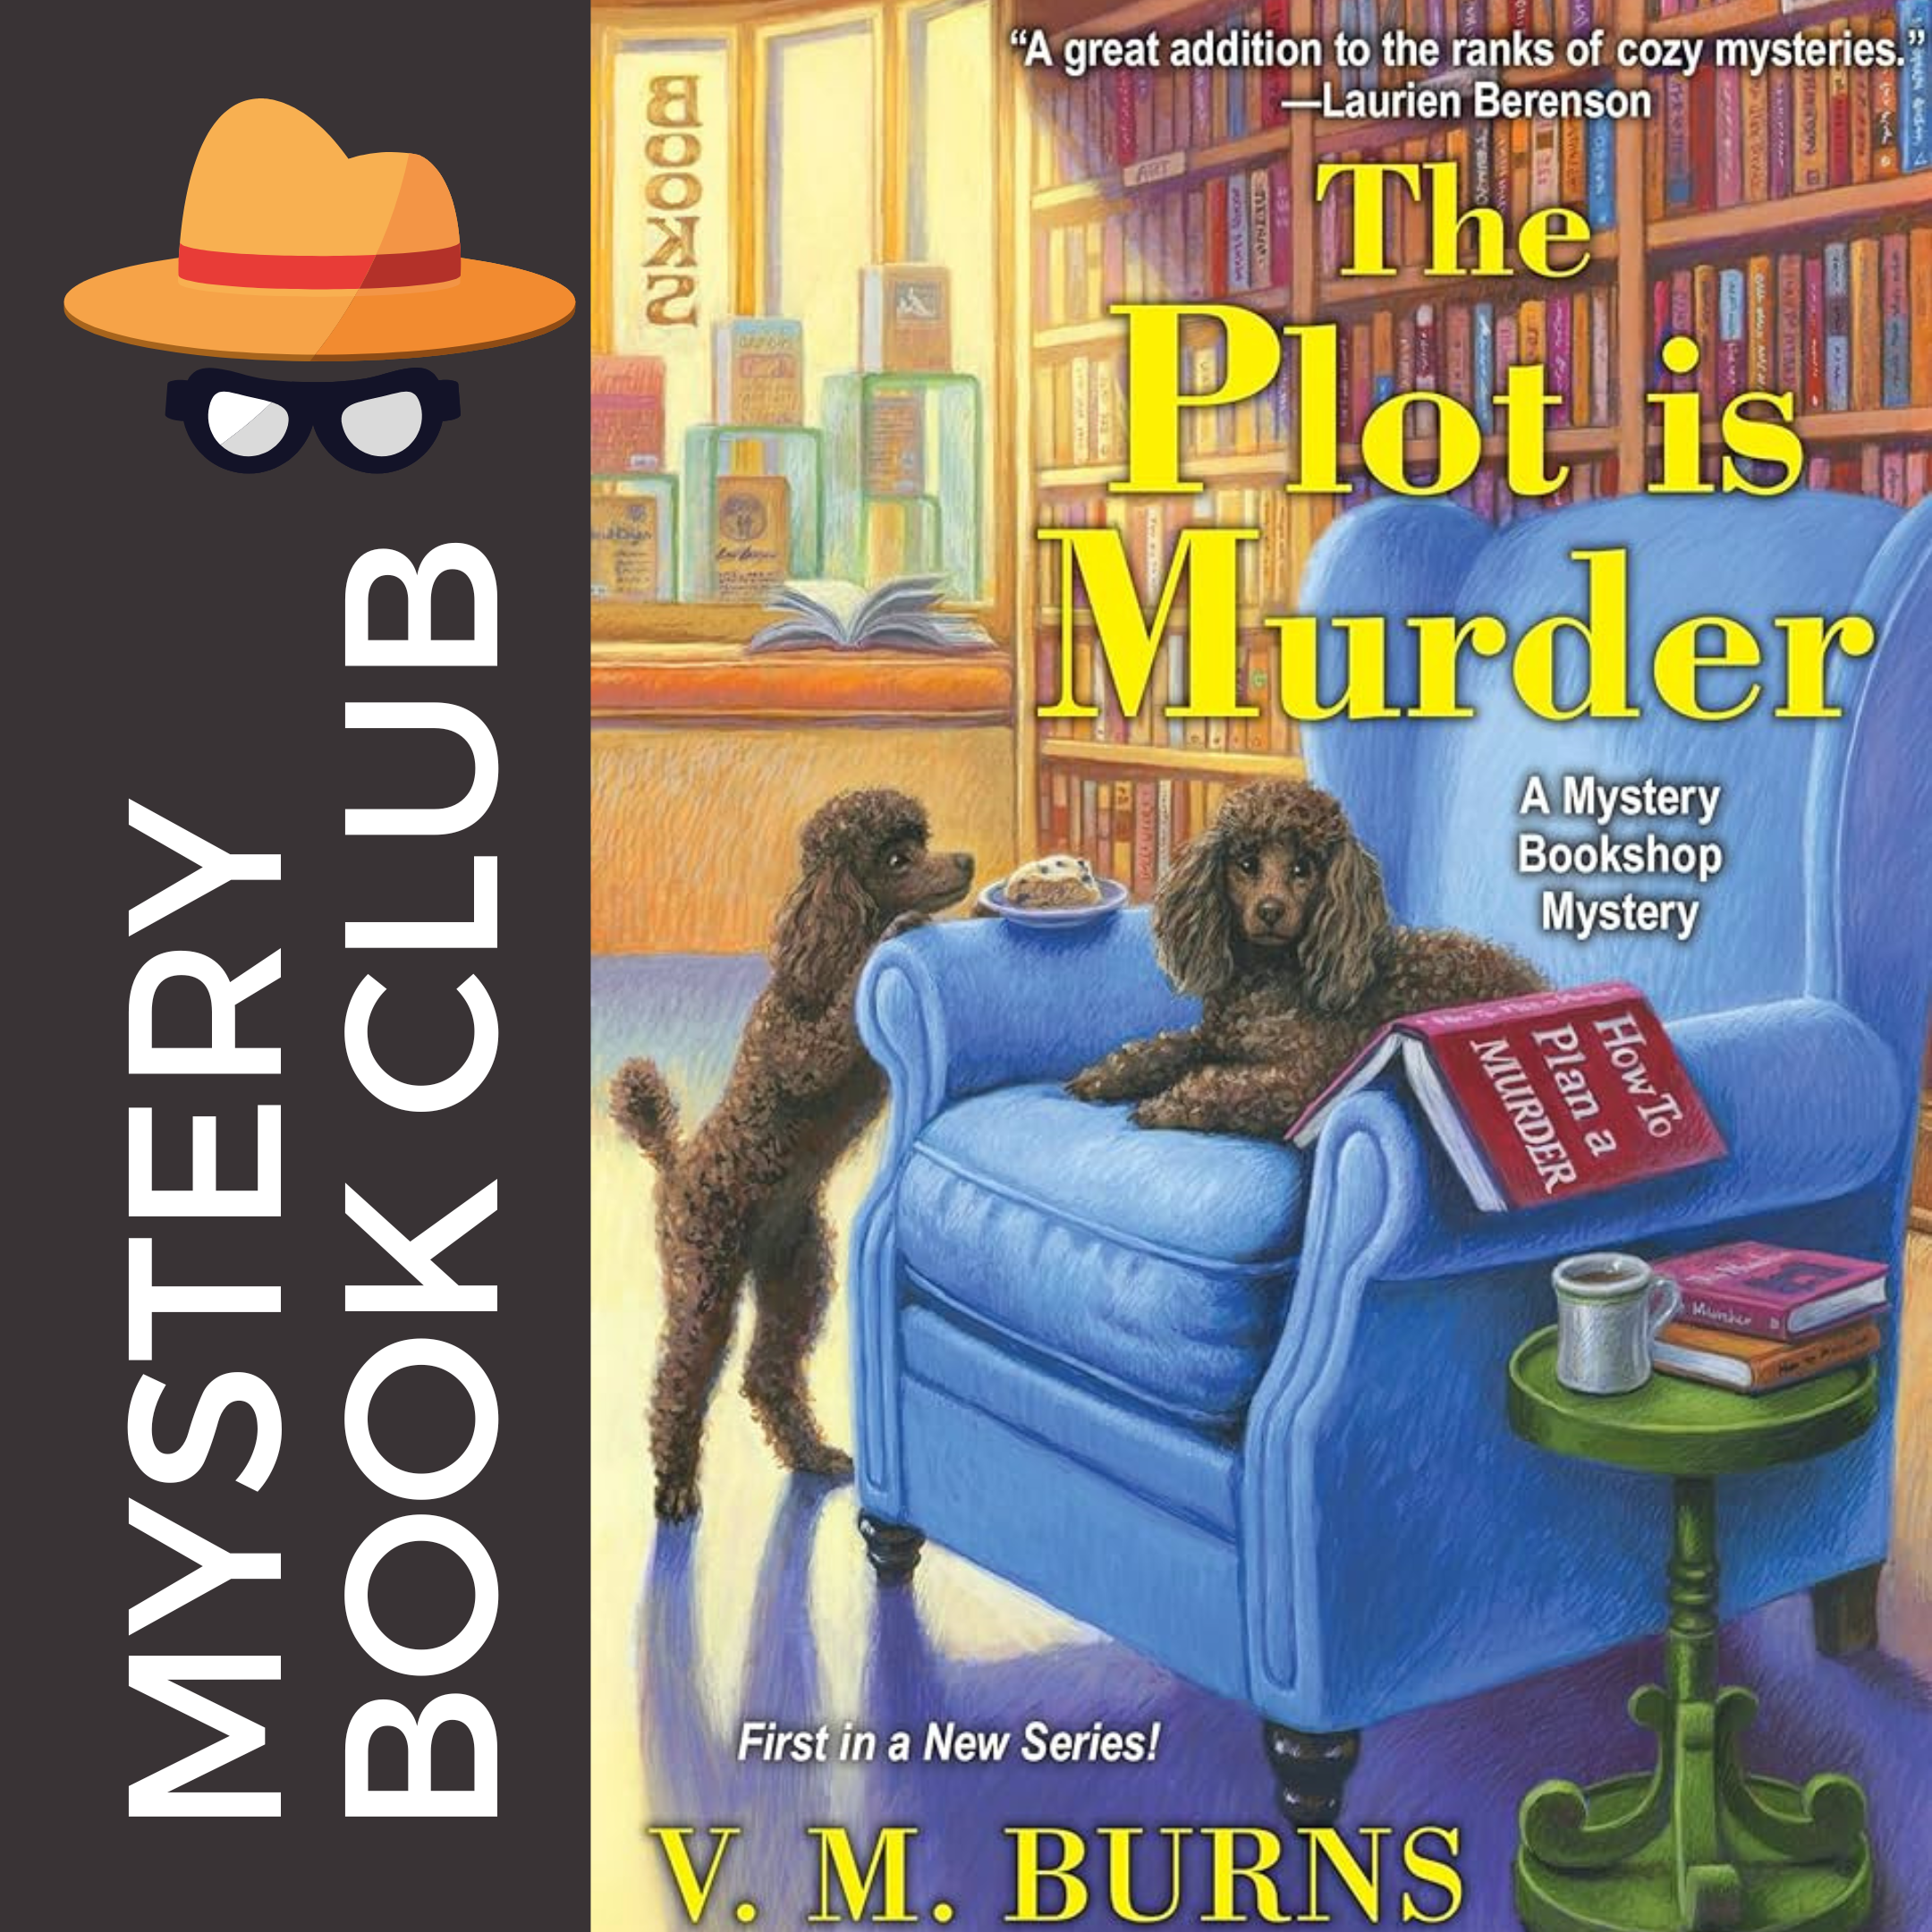 dark brown gray background, white text reads mystery book club with an image if a fedora and spectacles.  front cover image of book cover the plot is murder by v.m. burns